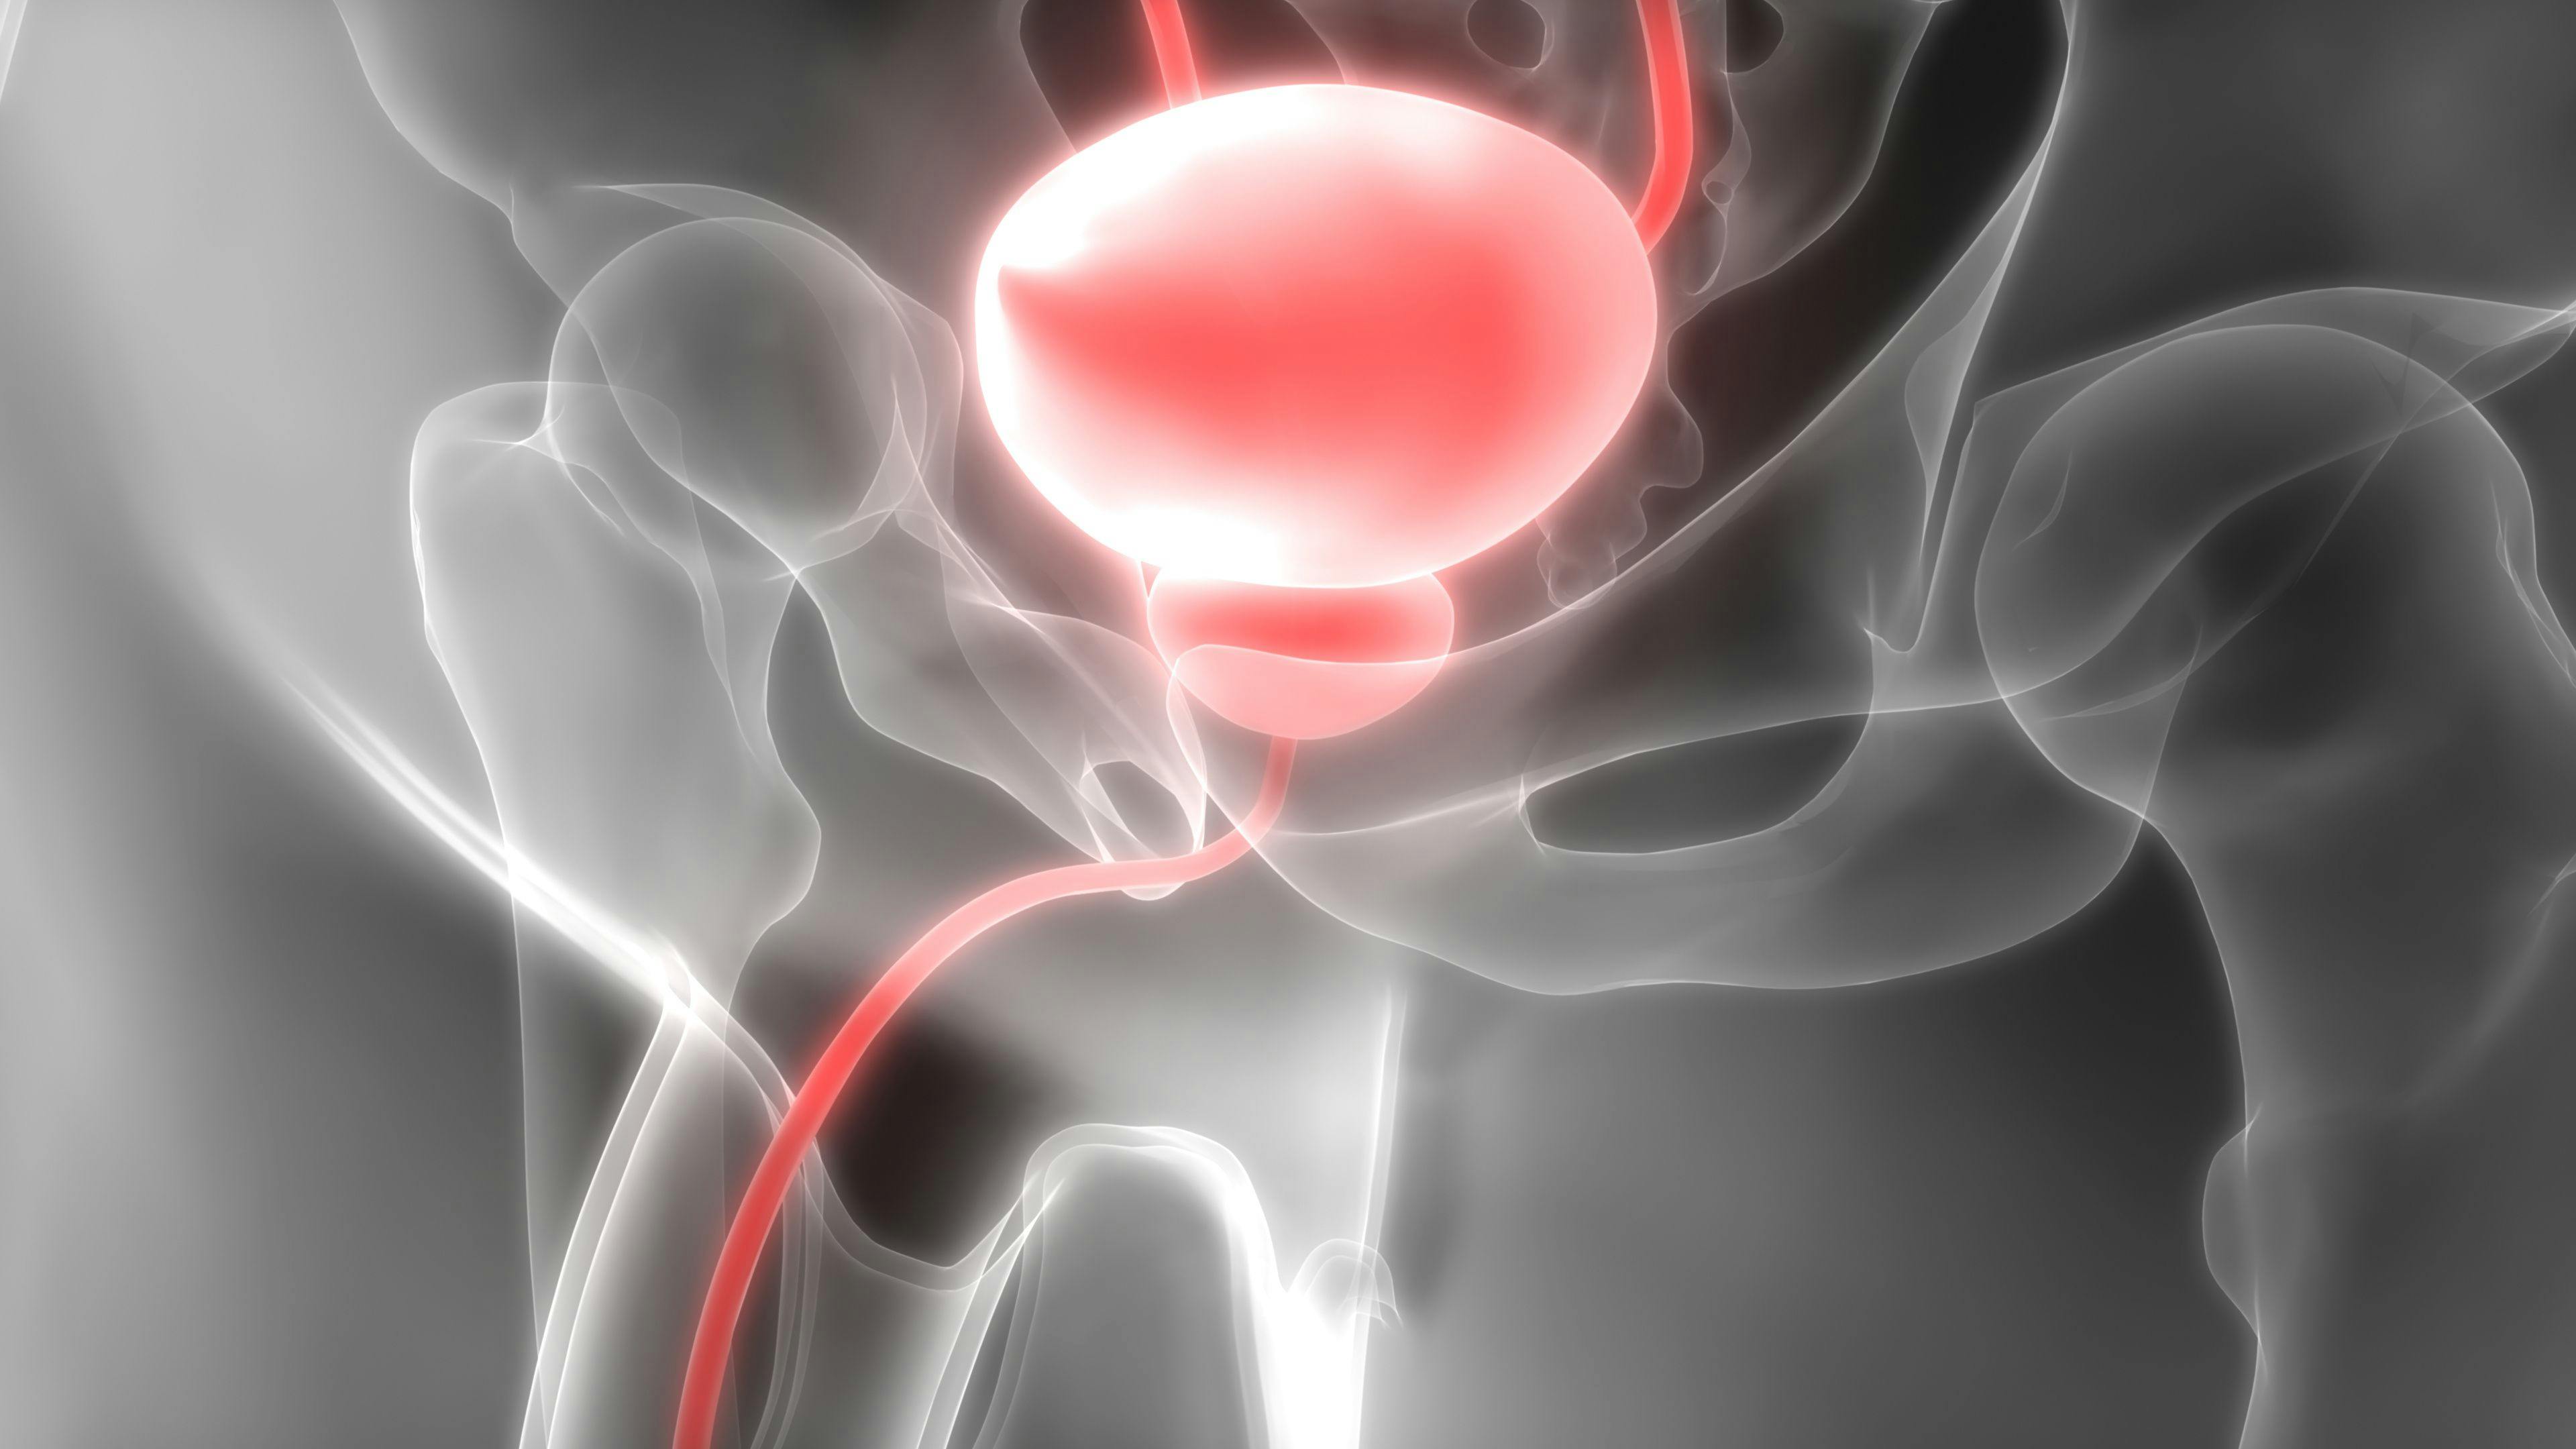 Gene Therapy for Overactive Bladder, Incontinence Shows Good Safety, Efficacy